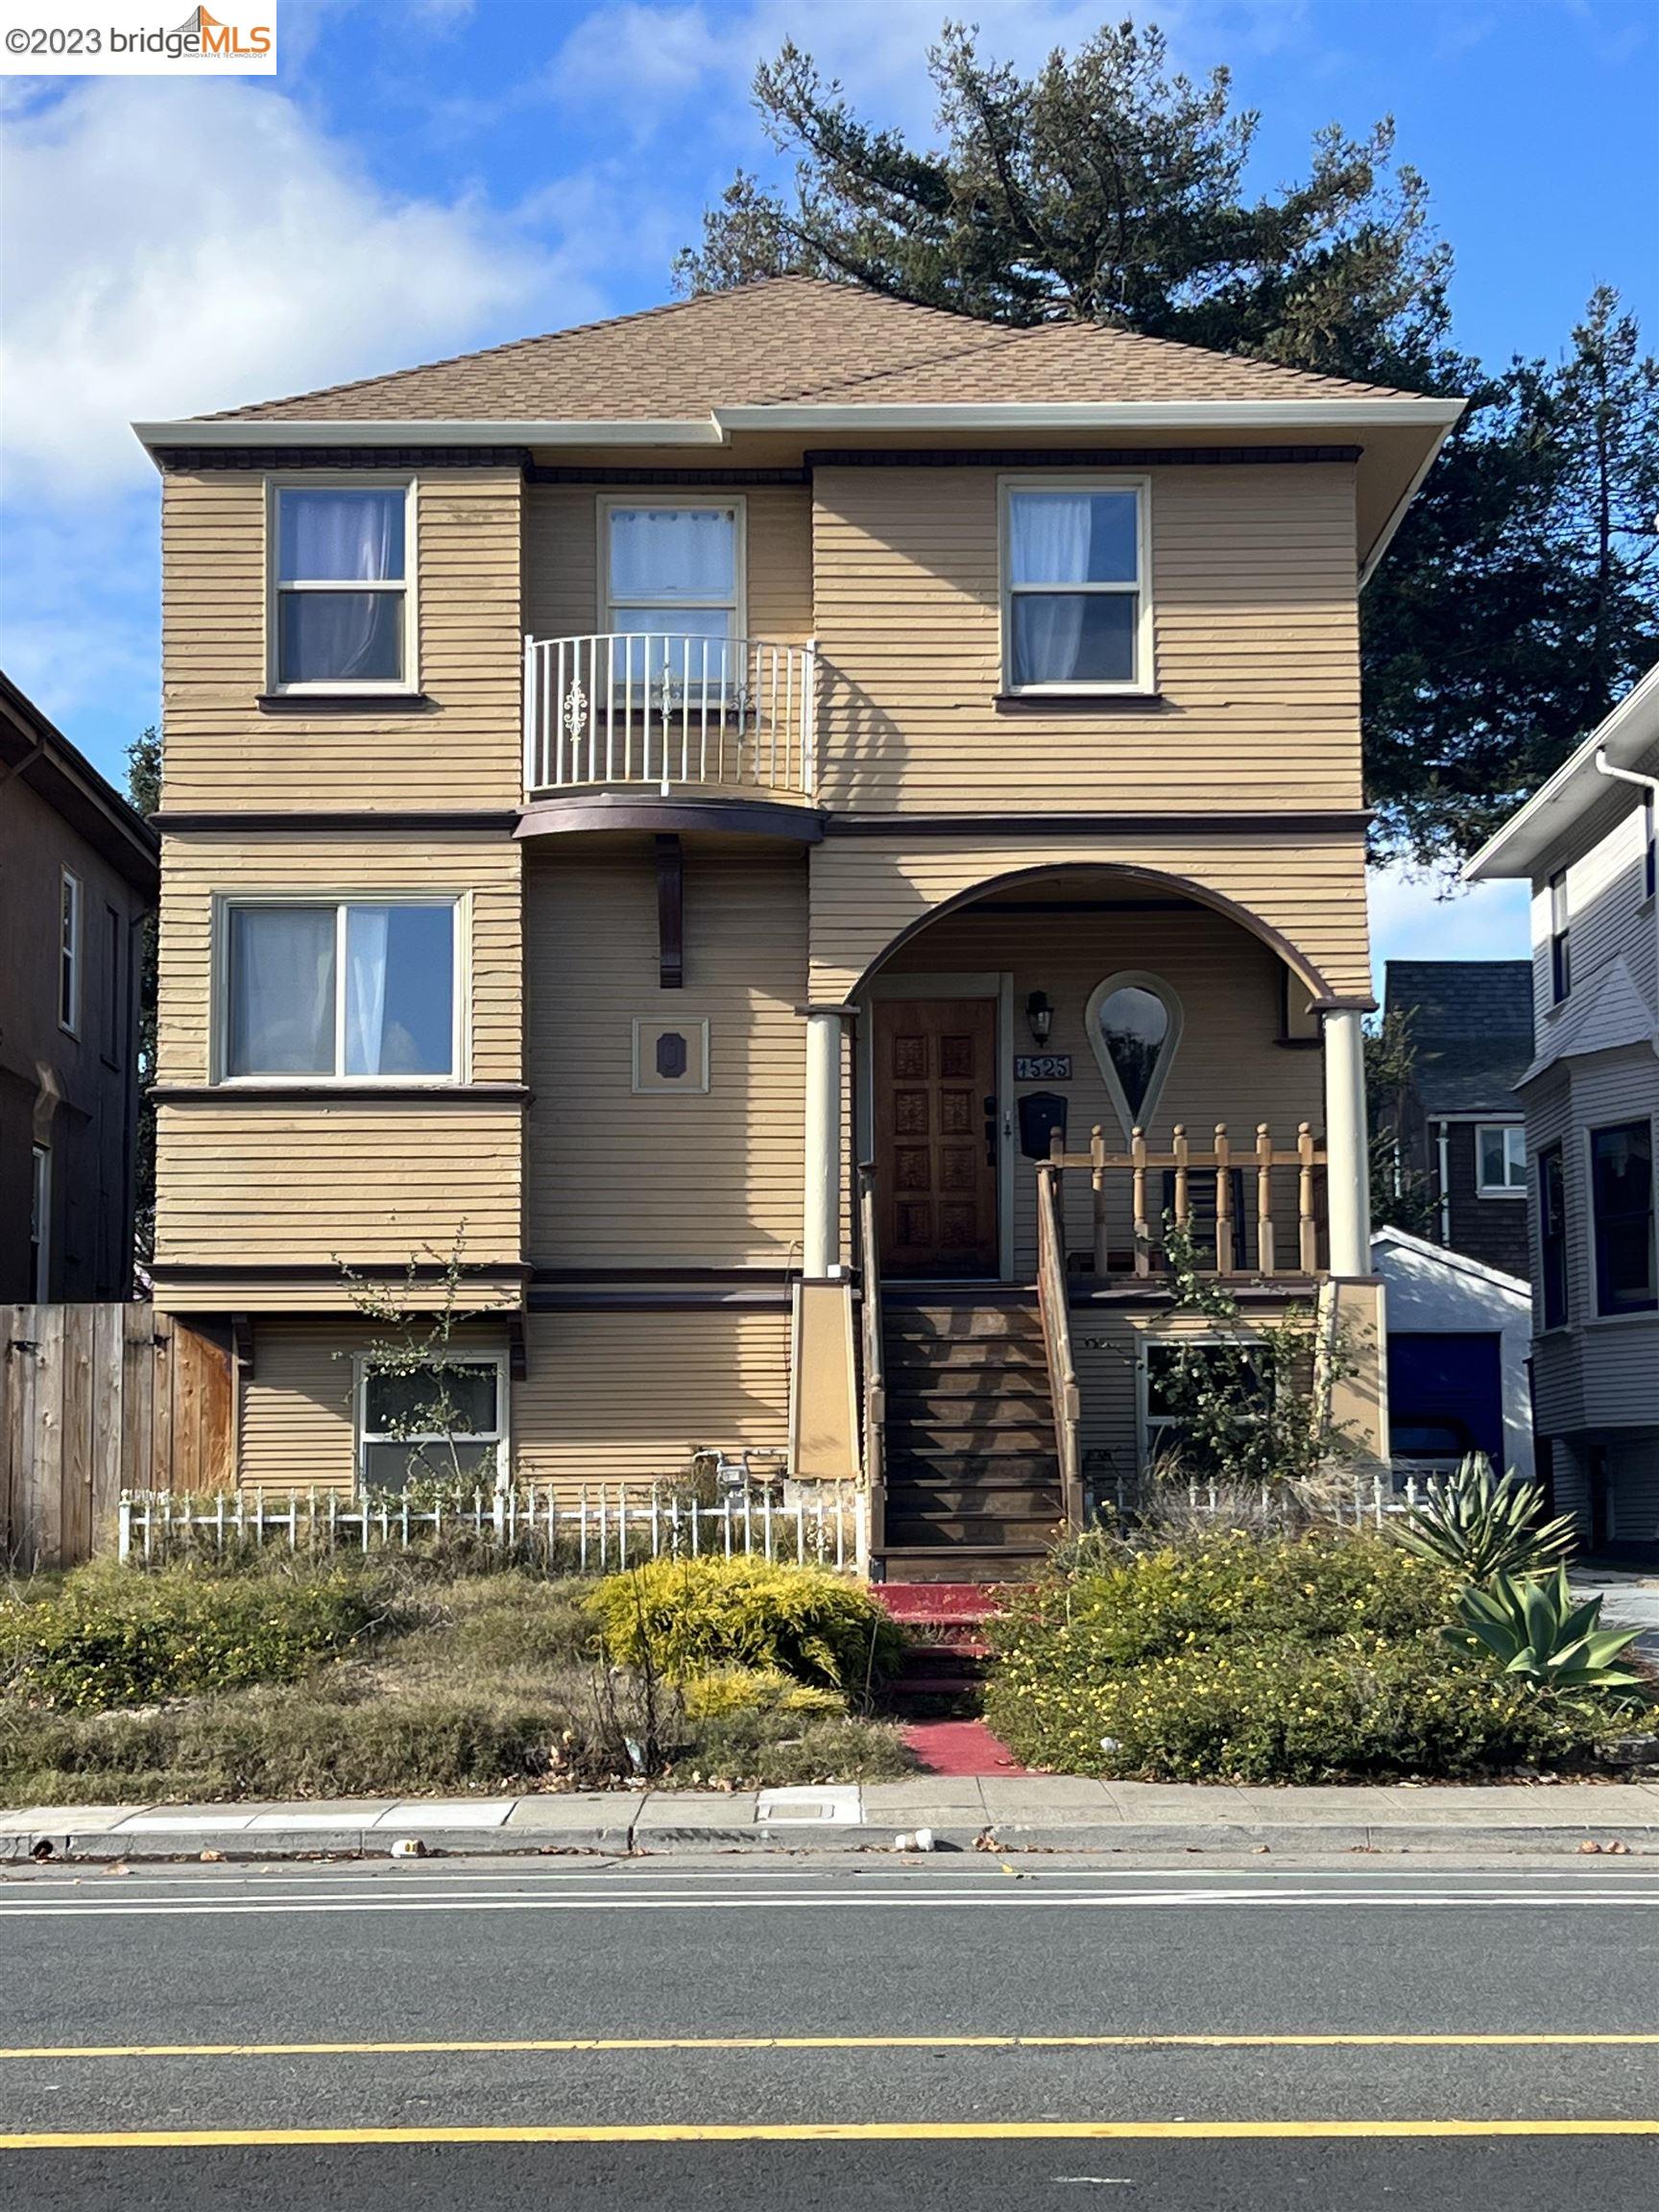 Terrific opportunity to own in Oakland! Previously remodeled from top to bottom with beautiful finishing touches. Conveniently located close to parks, schools, public transportation, restaurants, bars, shopping and freeway access! This is one you won't want to miss! PLEASE DO NOT DISTURB TENANTS